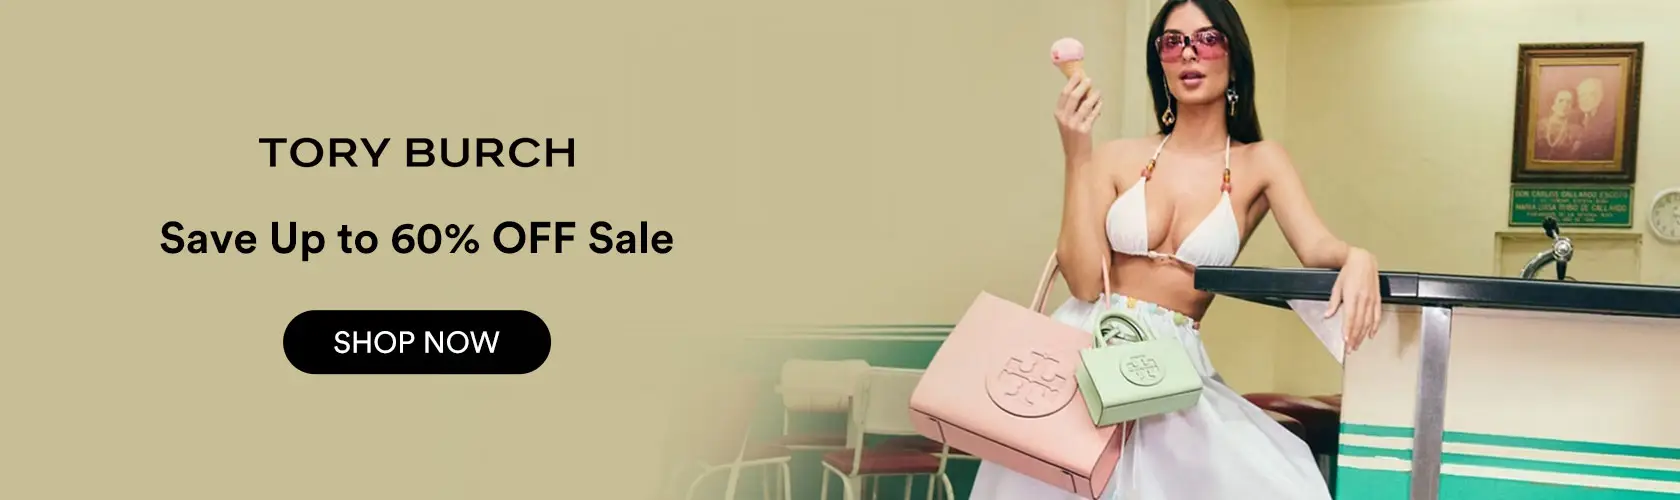 Tory Burch: Save Up to 60% OFF Sale